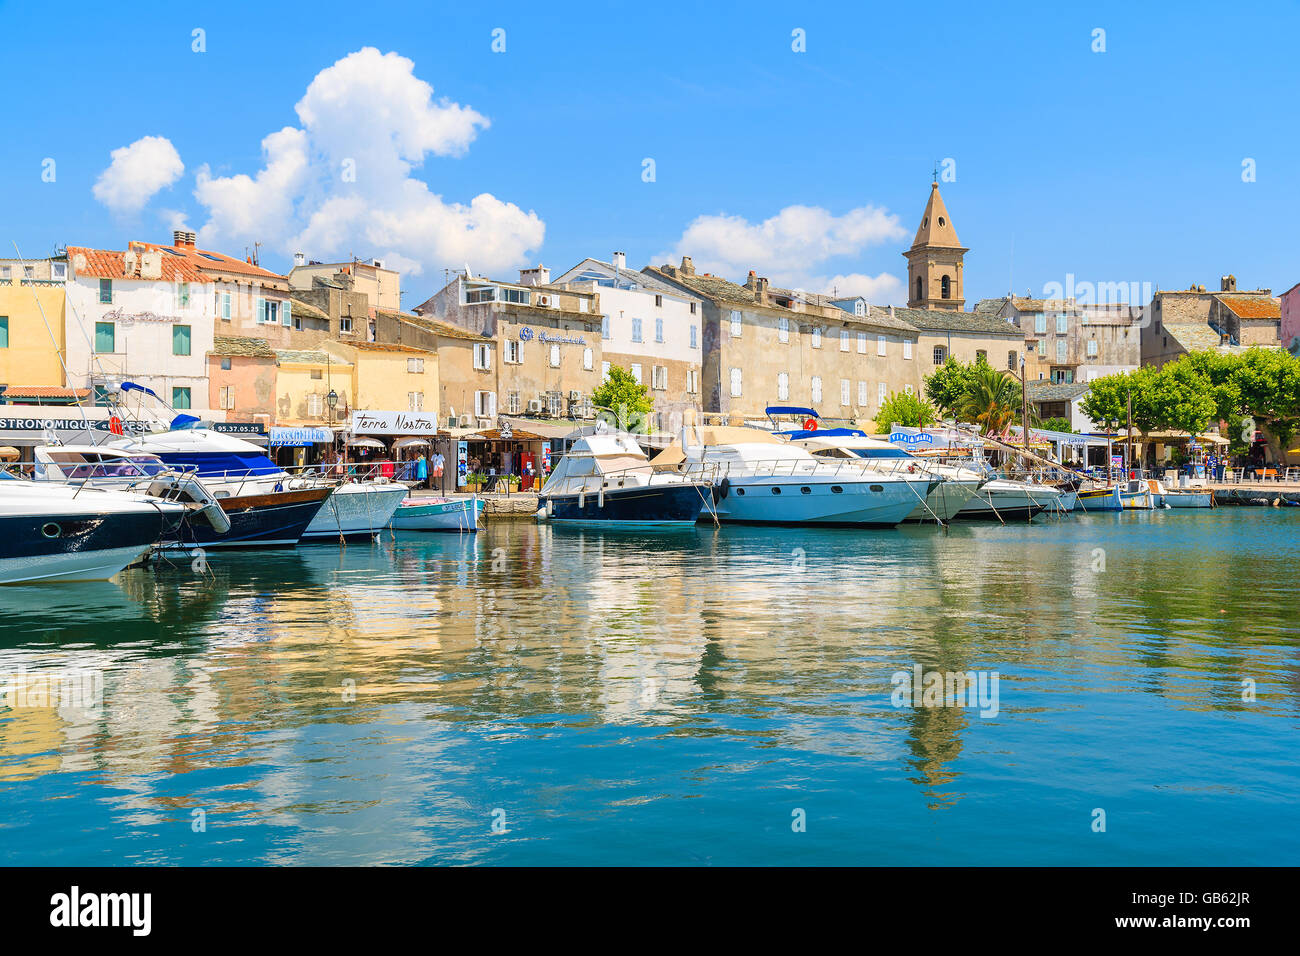 SAINT-FLORENT, CORSICA ISLAND - JUL 3, 2015: view of boats in Saint-Florent port which is a small cozy fishing village in northe Stock Photo